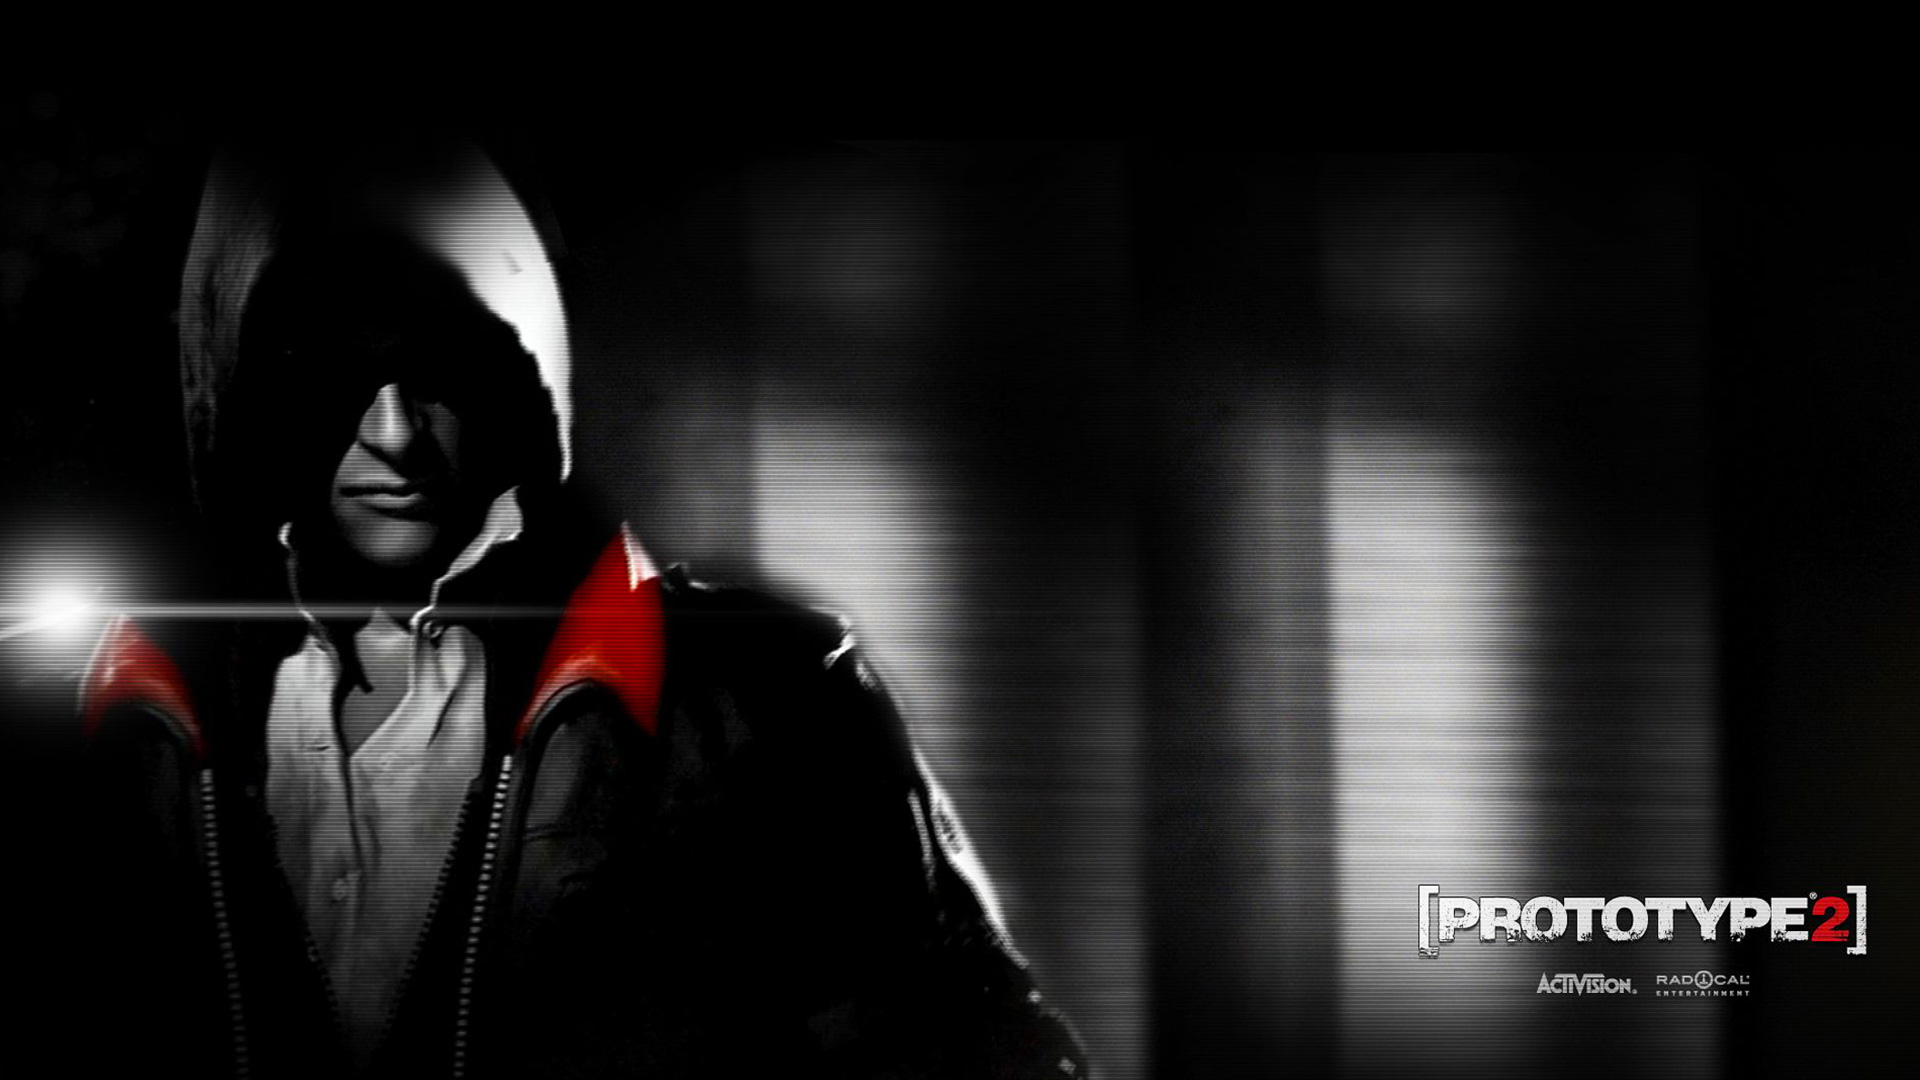  wallpapers of Prototype 2 You are downloading Prototype 2 wallpaper 6